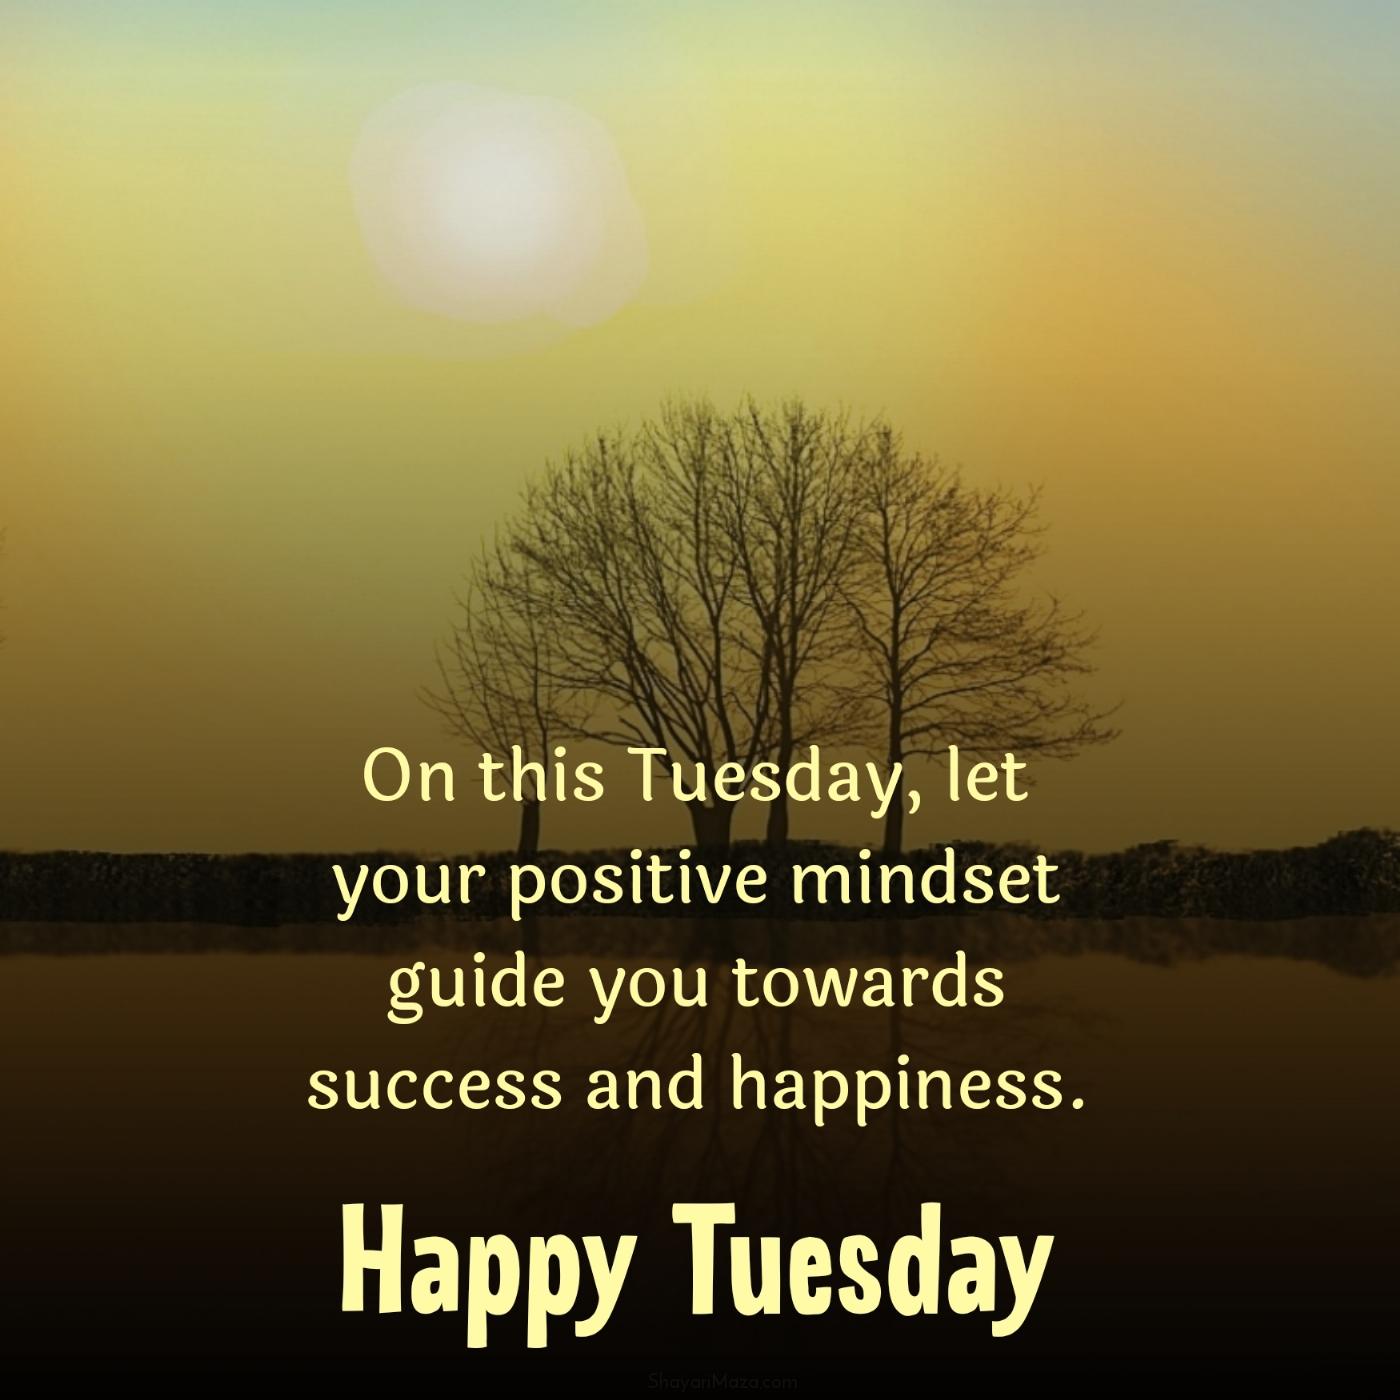 On this Tuesday let your positive mindset guide you